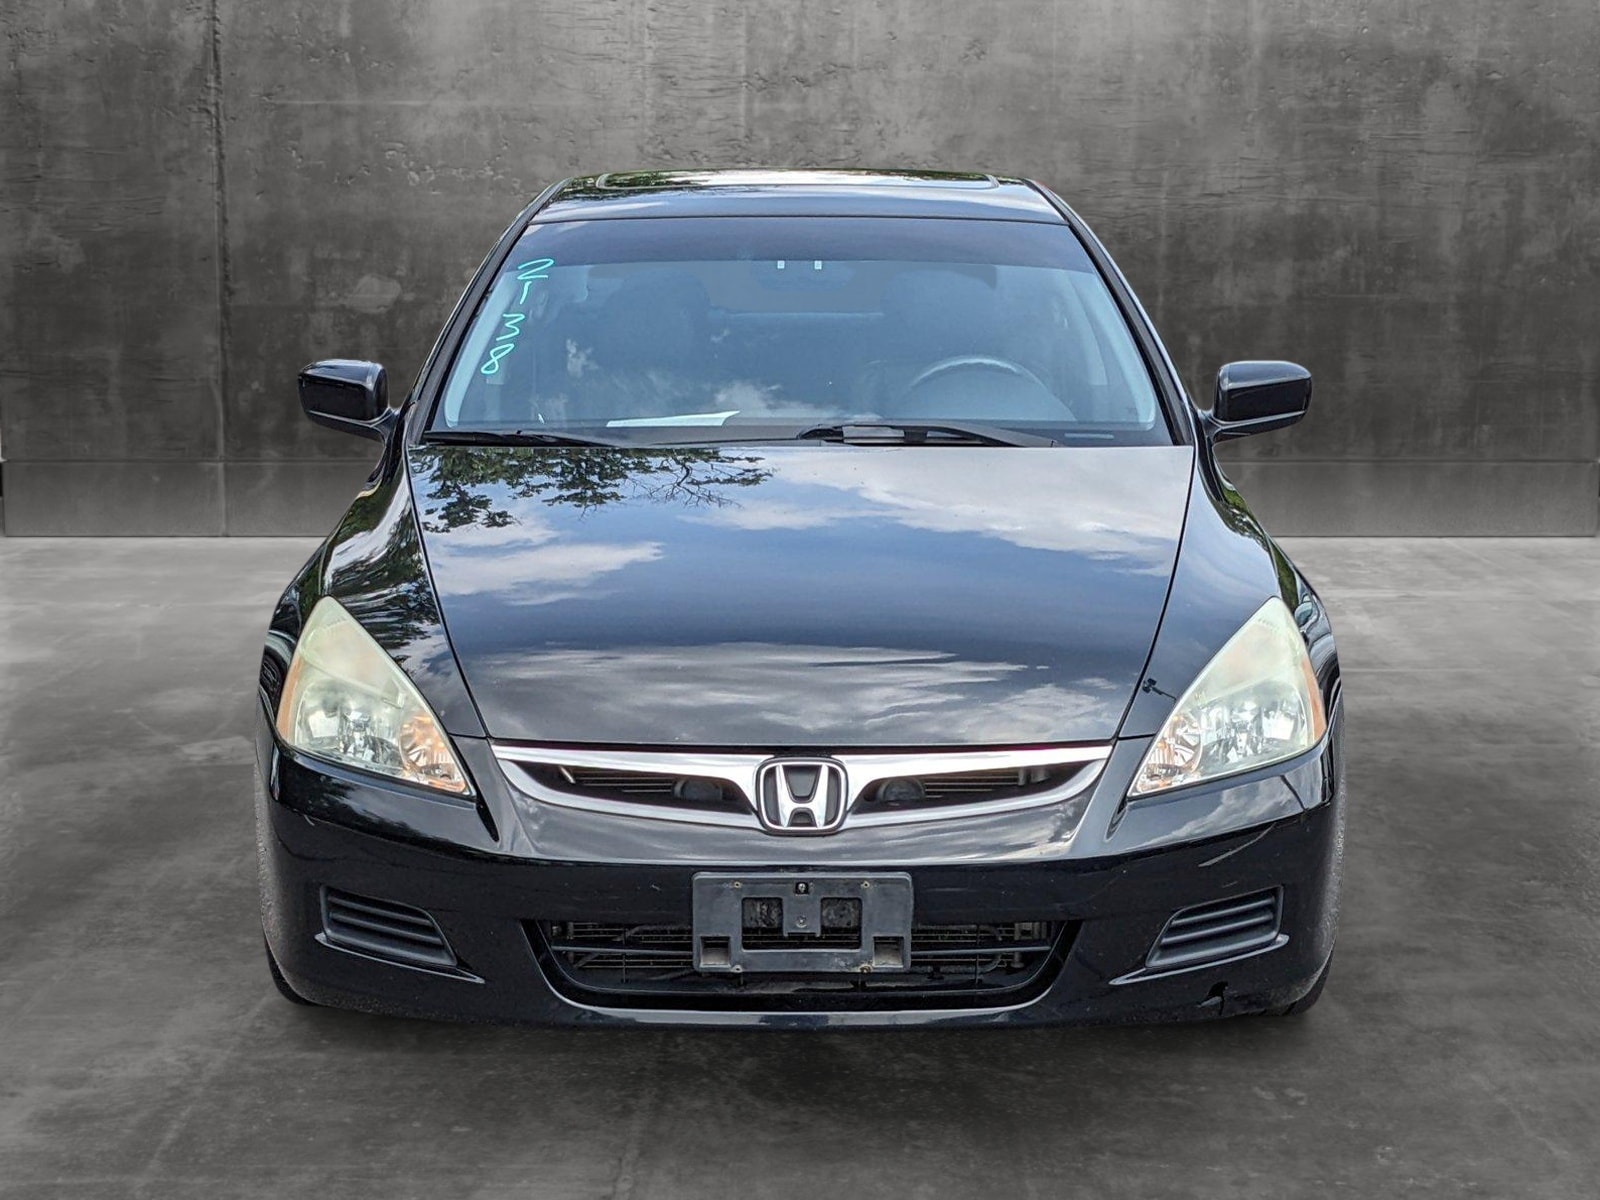 Used 2007 Honda Accord 3.0 EX with VIN 1HGCM66507A106297 for sale in Des Plaines, IL